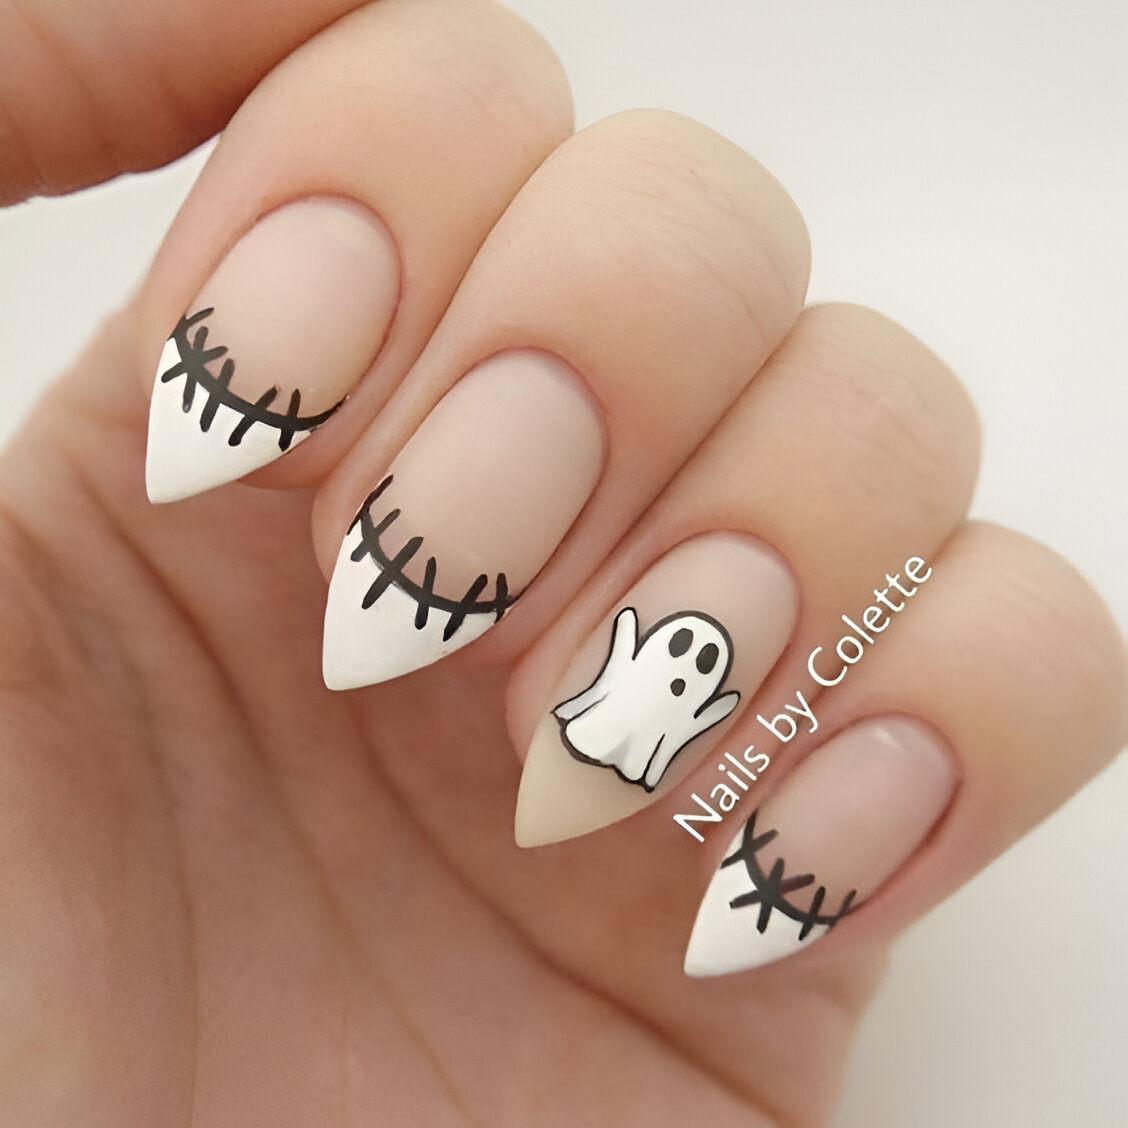 Spooky White French Manicure